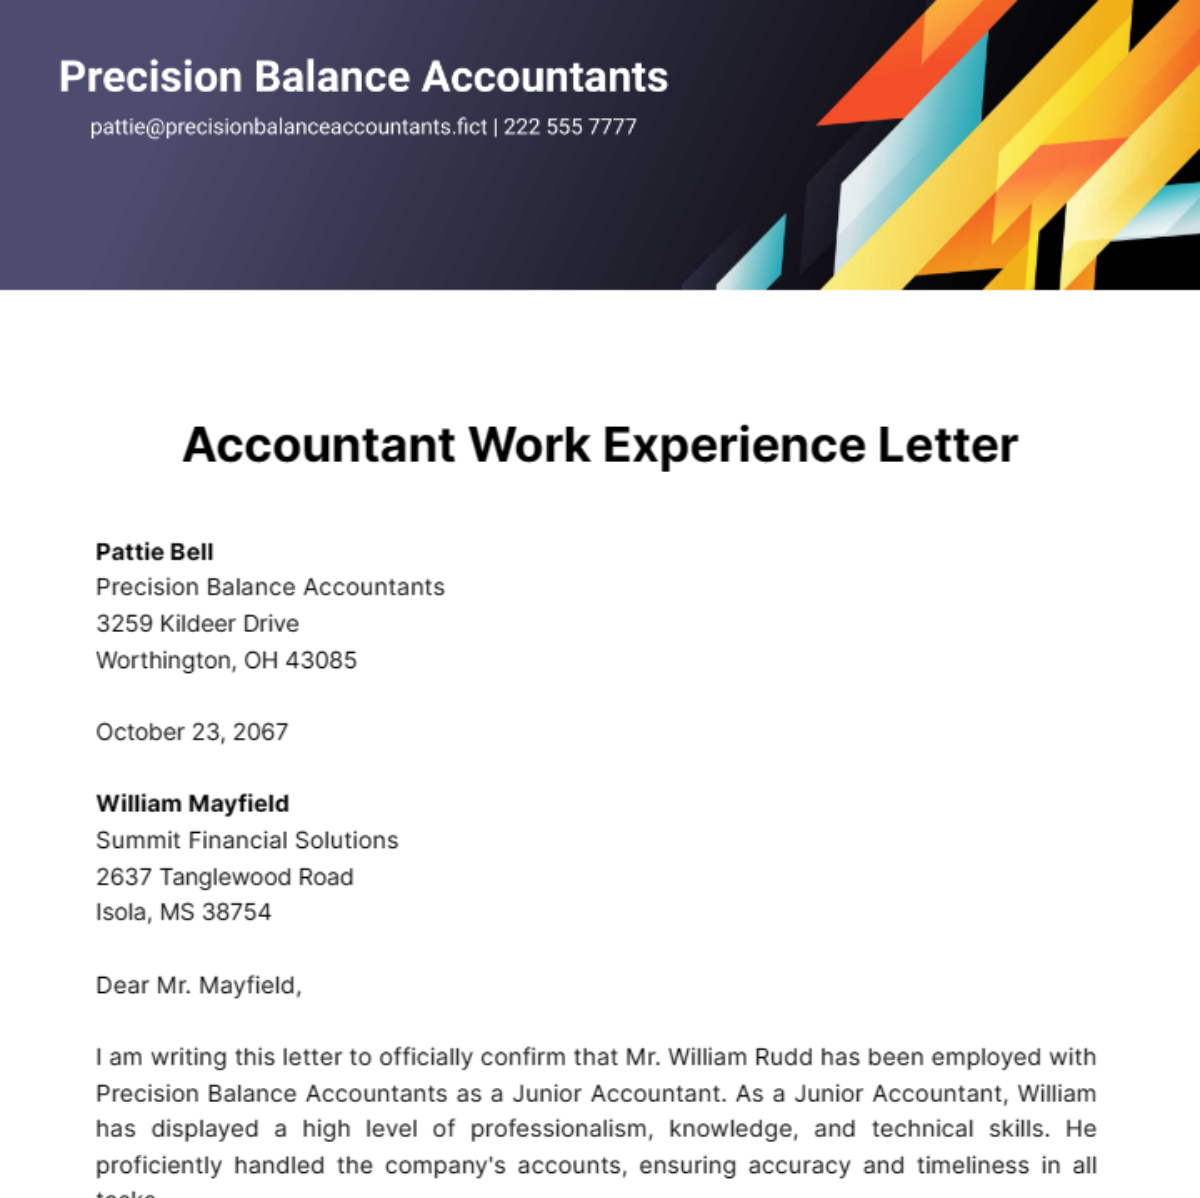 Accountant Work Experience Letter Template